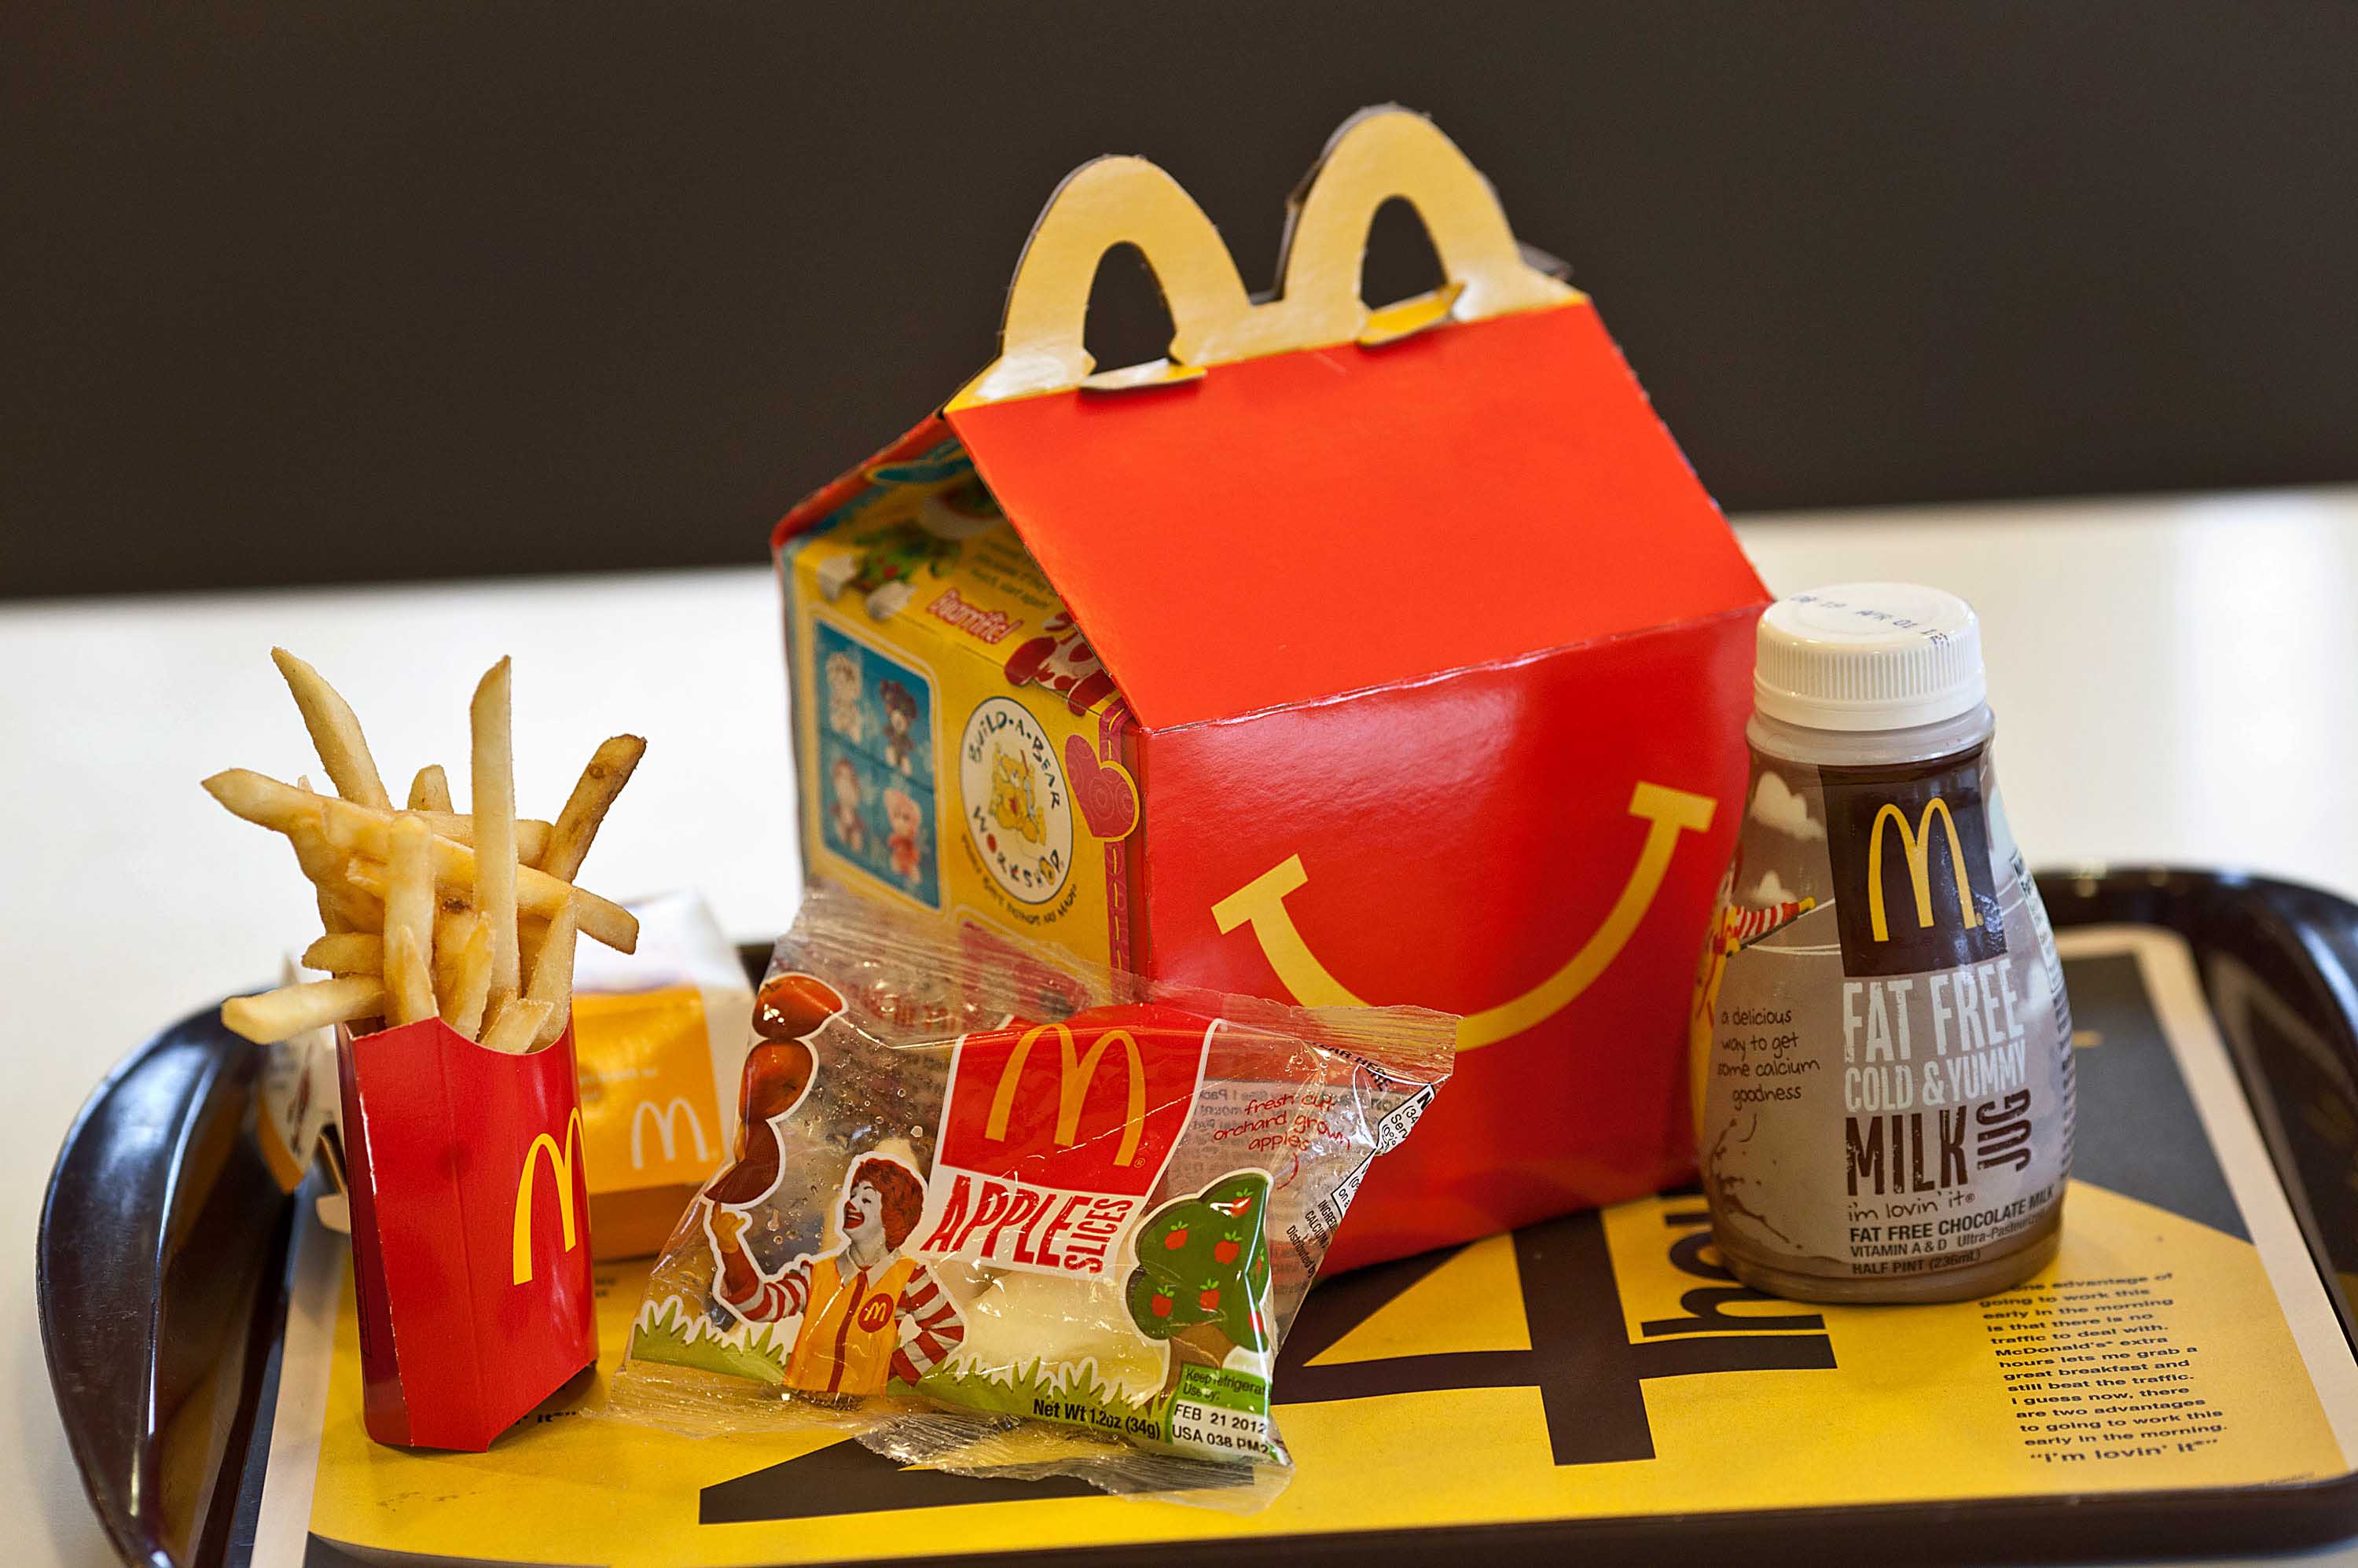 A Happy Meal is displayed for a photograph on a tray at a McDonald's Corp. restaurant in Little Falls, New Jersey, U.S., on Wednesday, Feb. 15, 2012. McDonald's Corp., the world's largest restaurant chain, said sales at stores open at least 13 months rose 6.7 percent globally last month as beverages and Chicken McBites helped the U.S. business. Photographer: Emile Wamsteker/Bloomberg via Getty Images